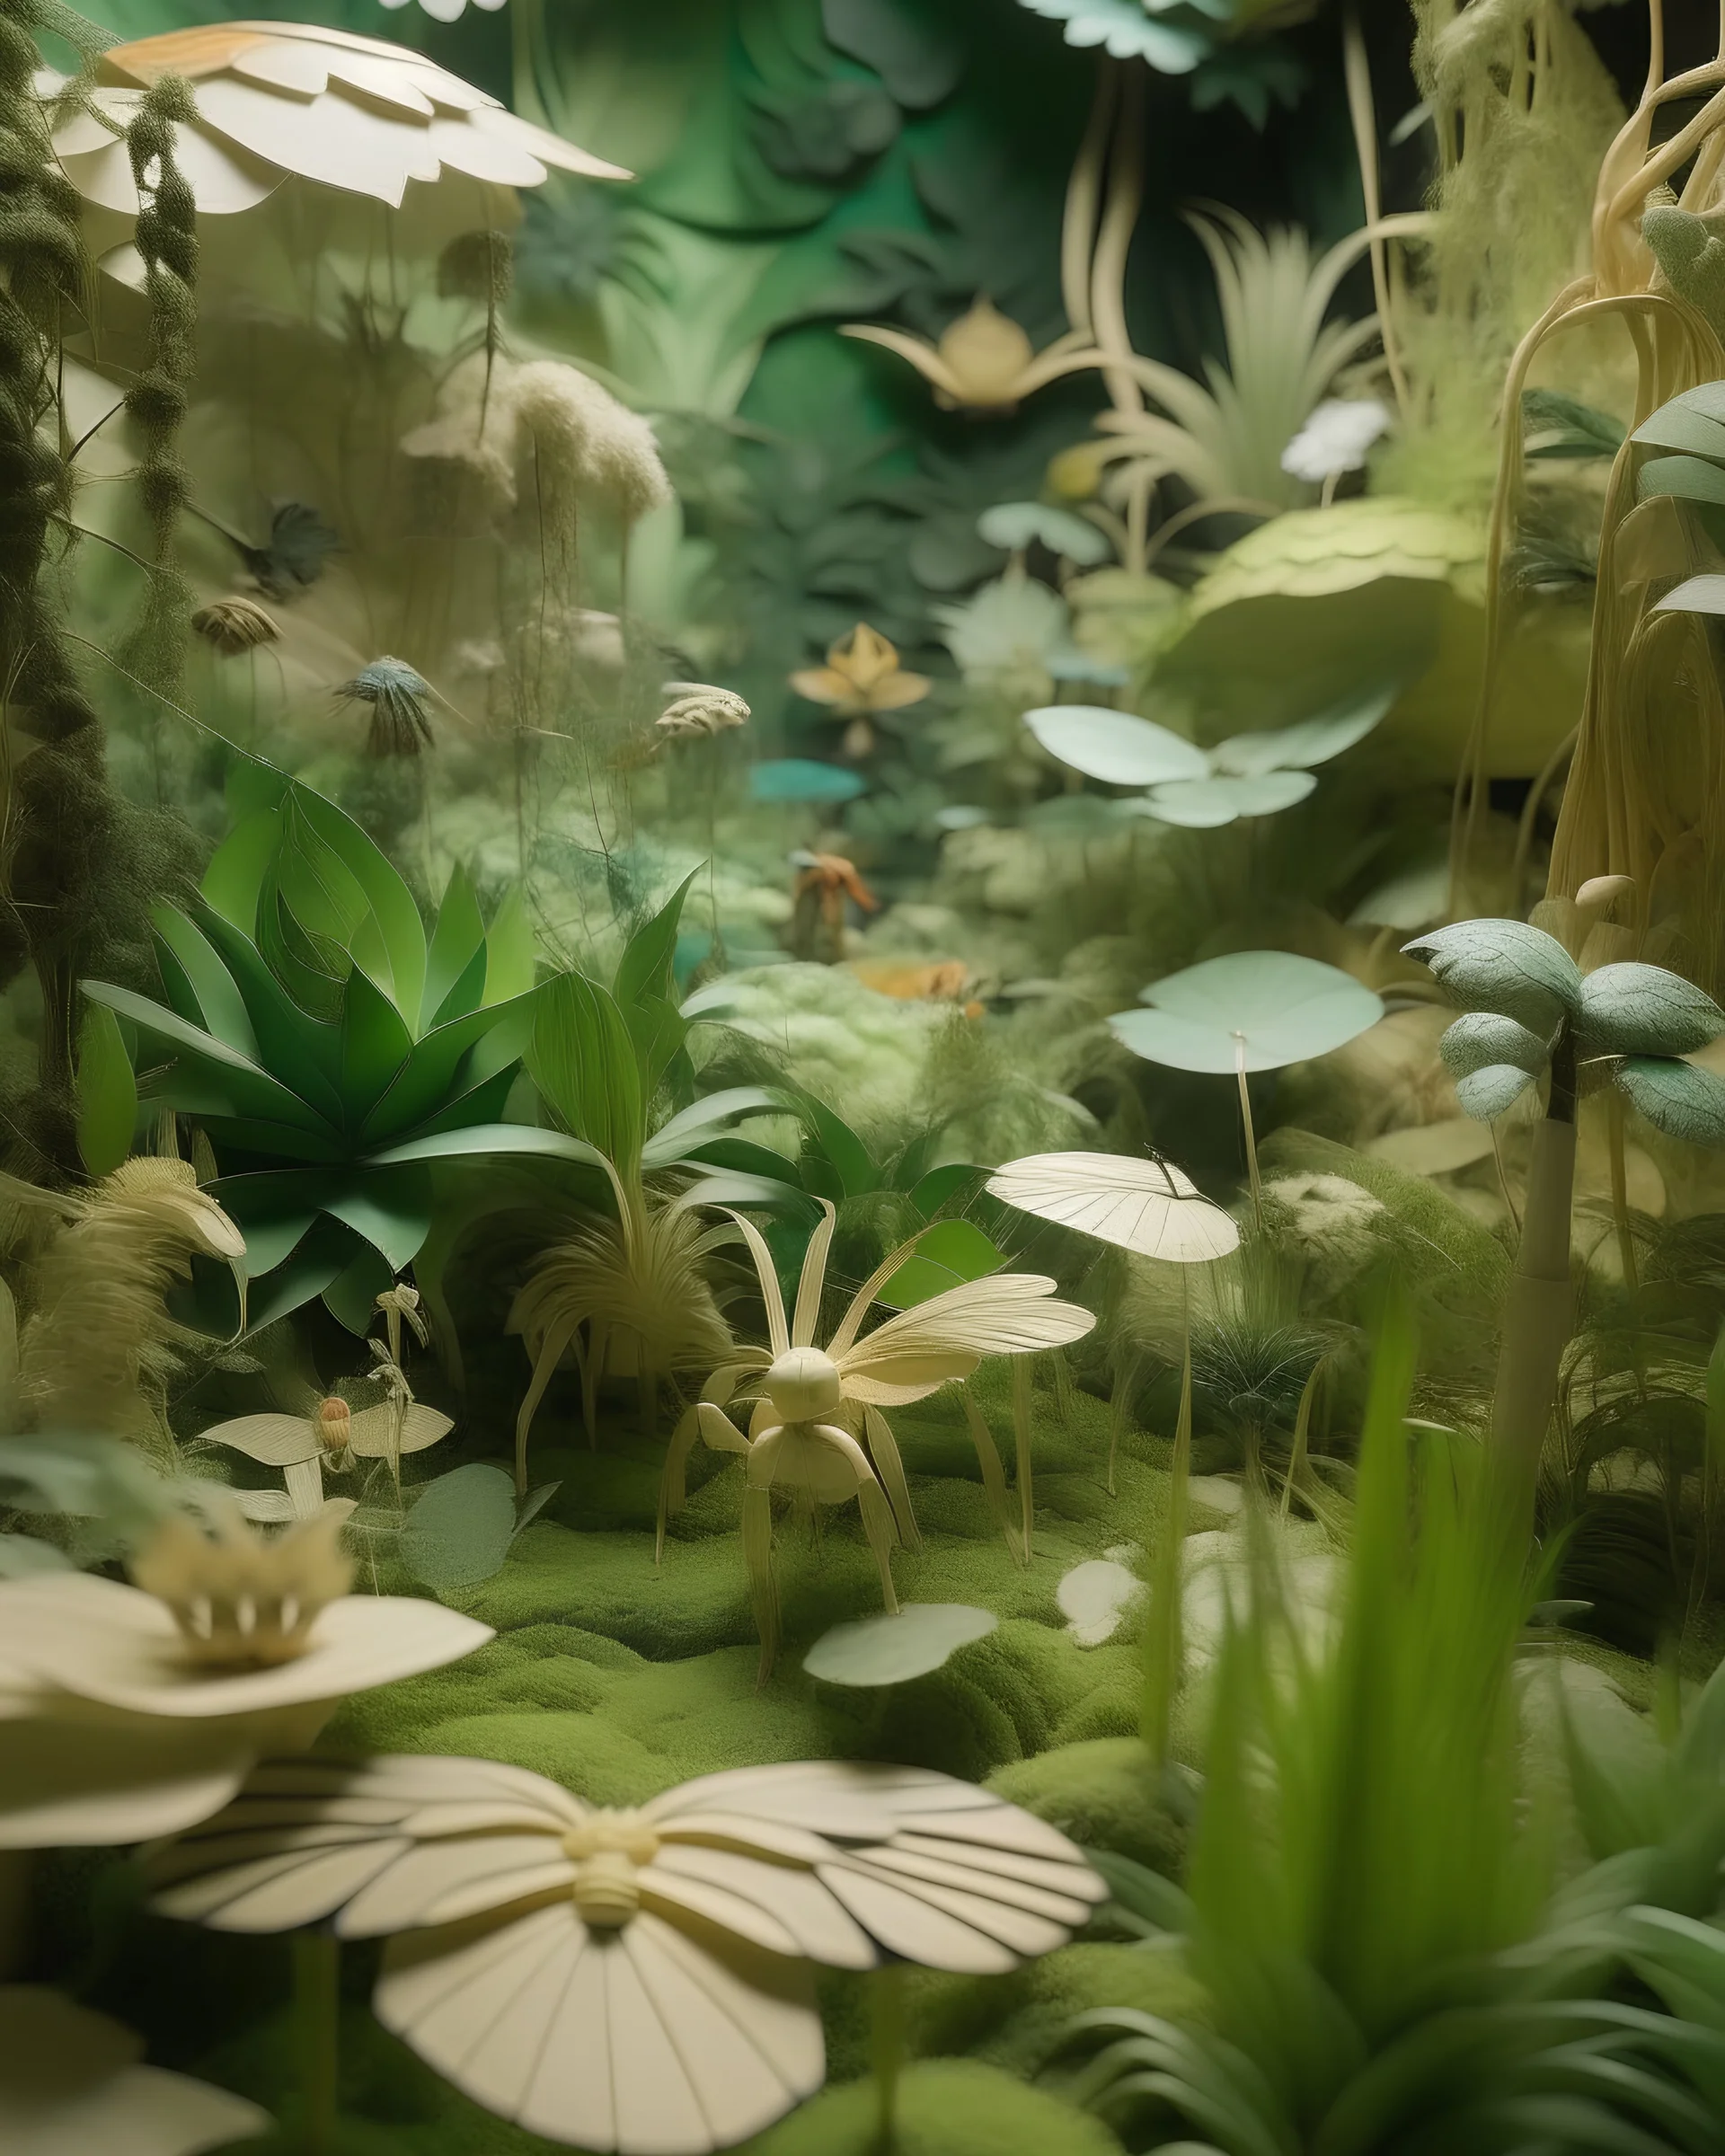 A jungle filled with insects designed in Chinese paper arts